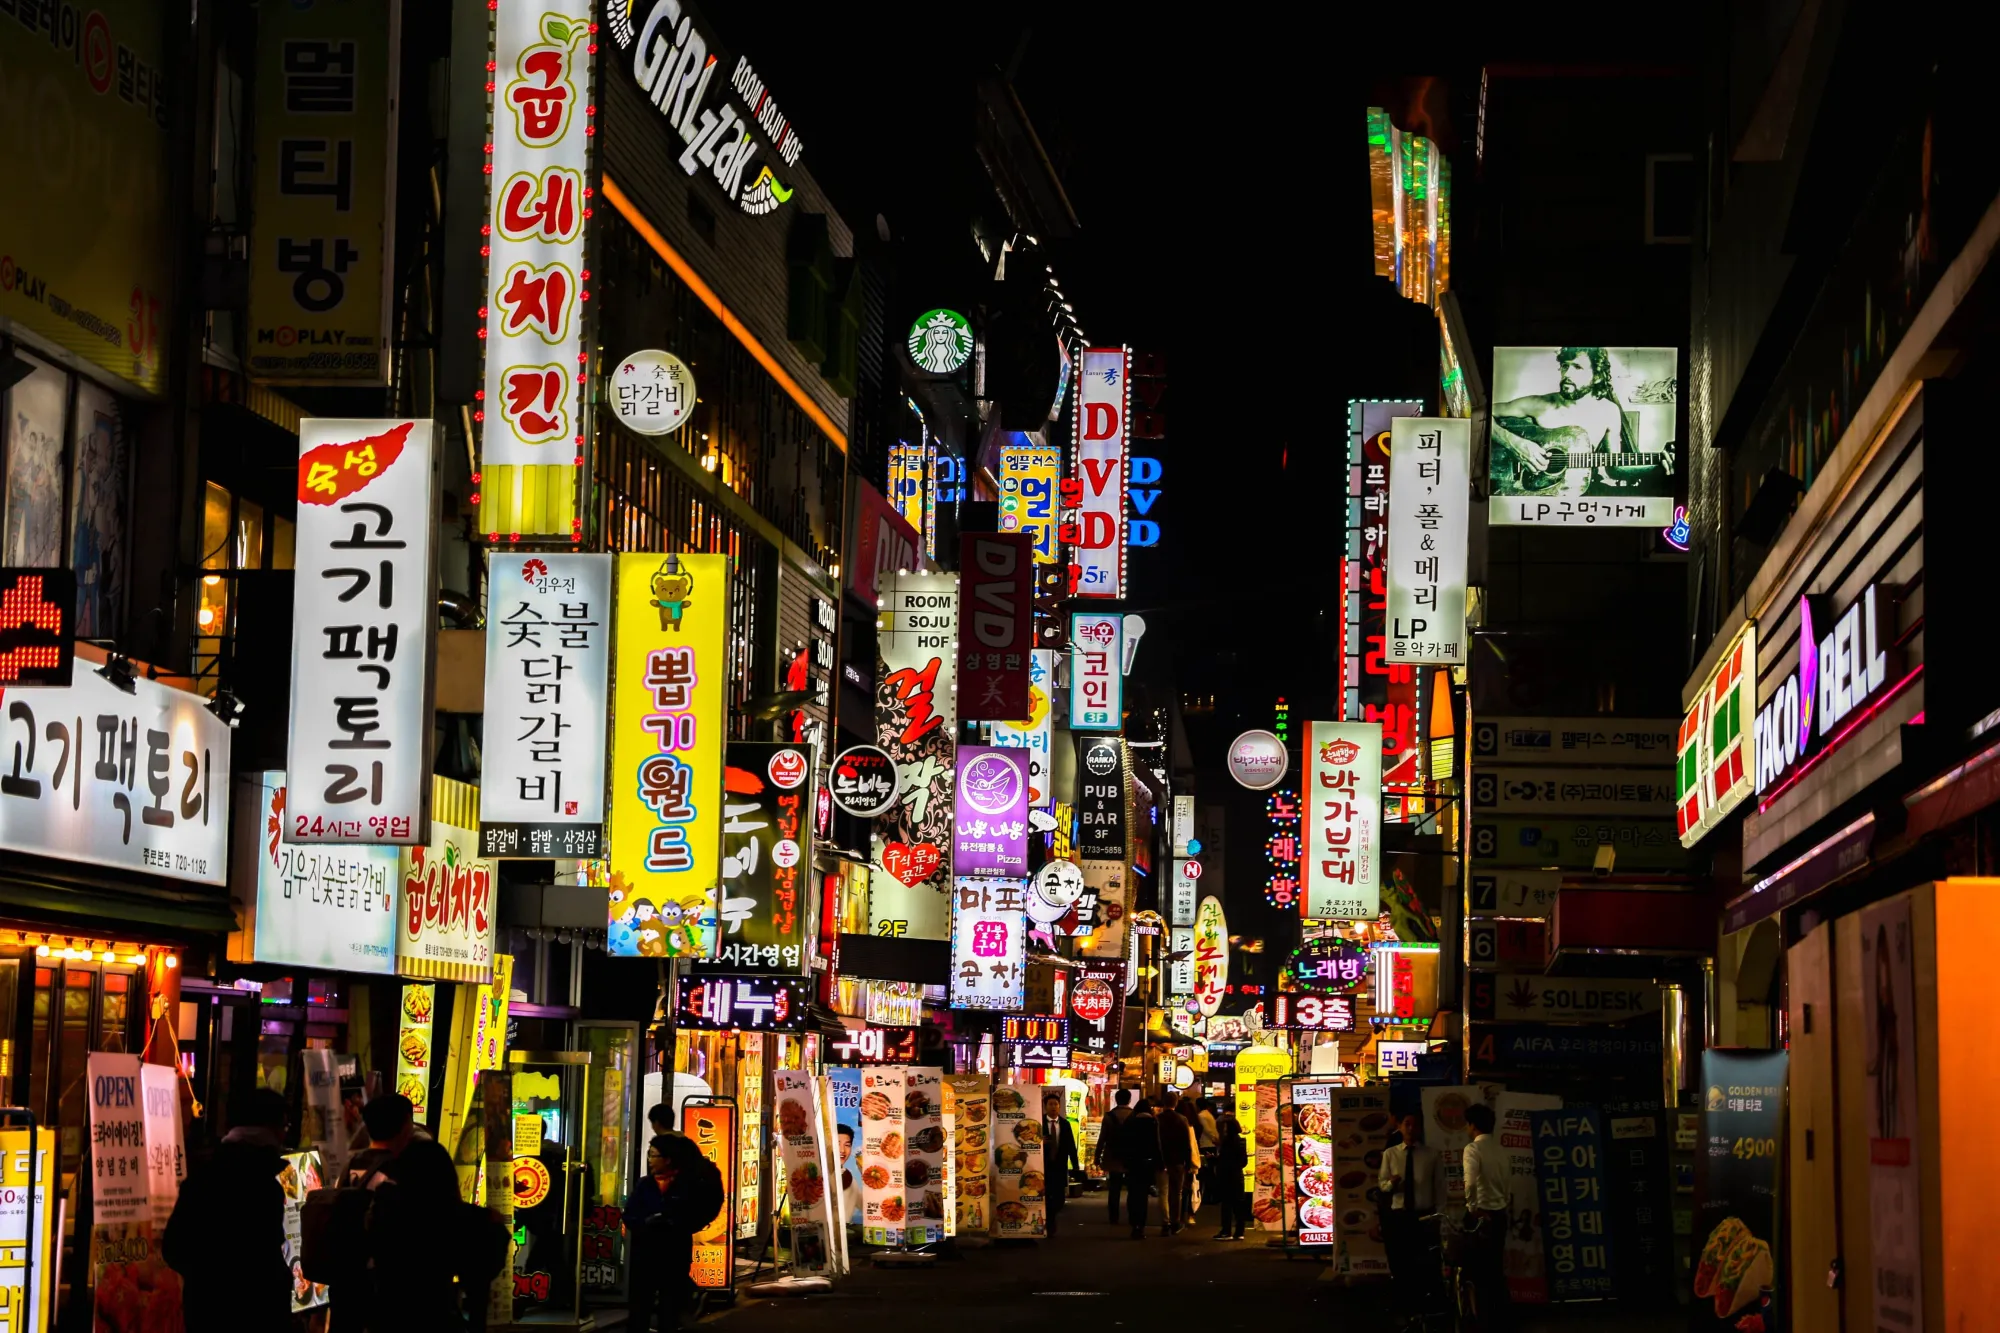 Neon signs in South Korea